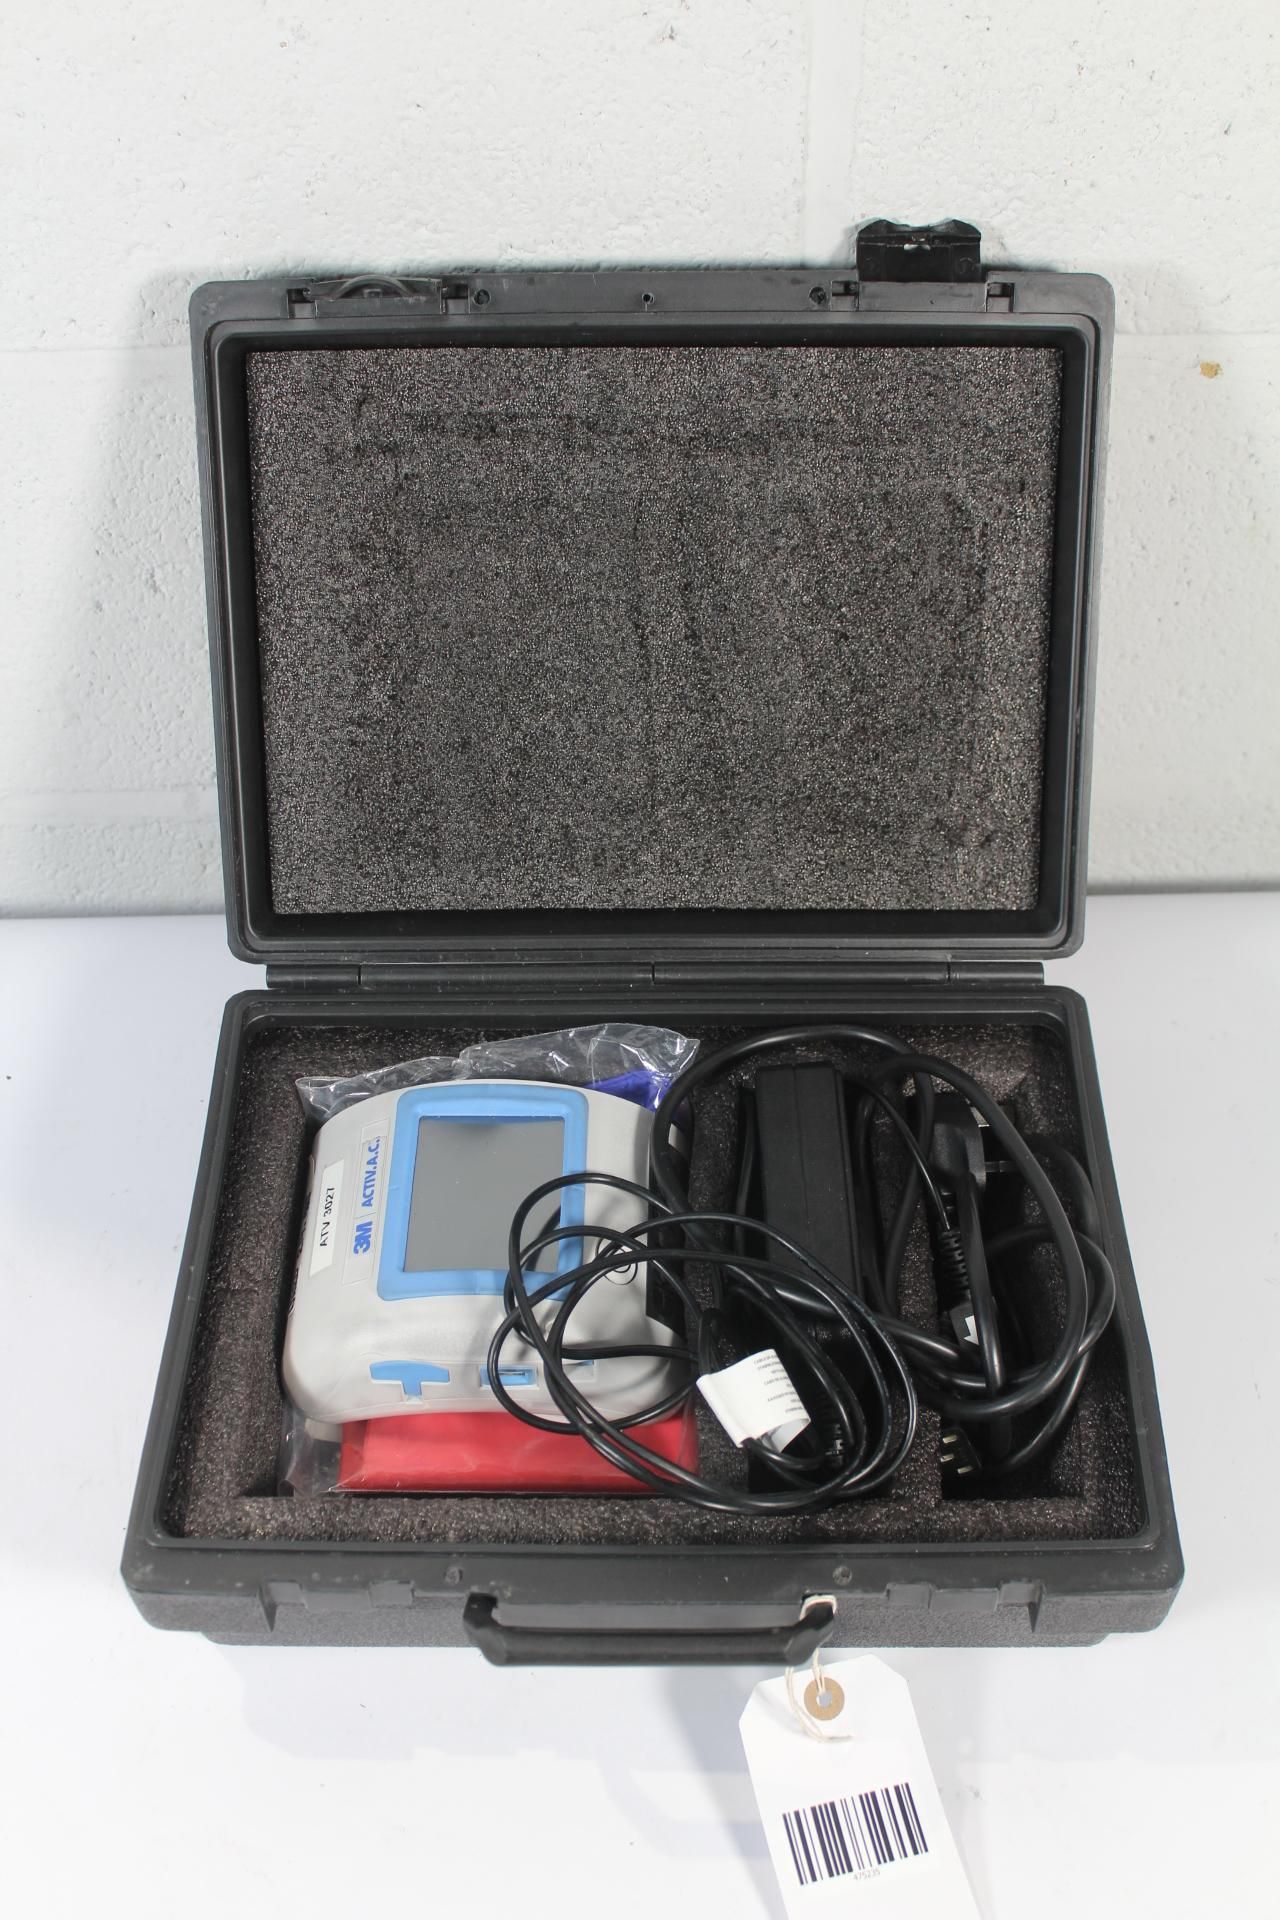 KCI Kinetic 3M ActiVAC Negative Pressure Wound Therapy System in a Black Hard Case. Pre-owned.